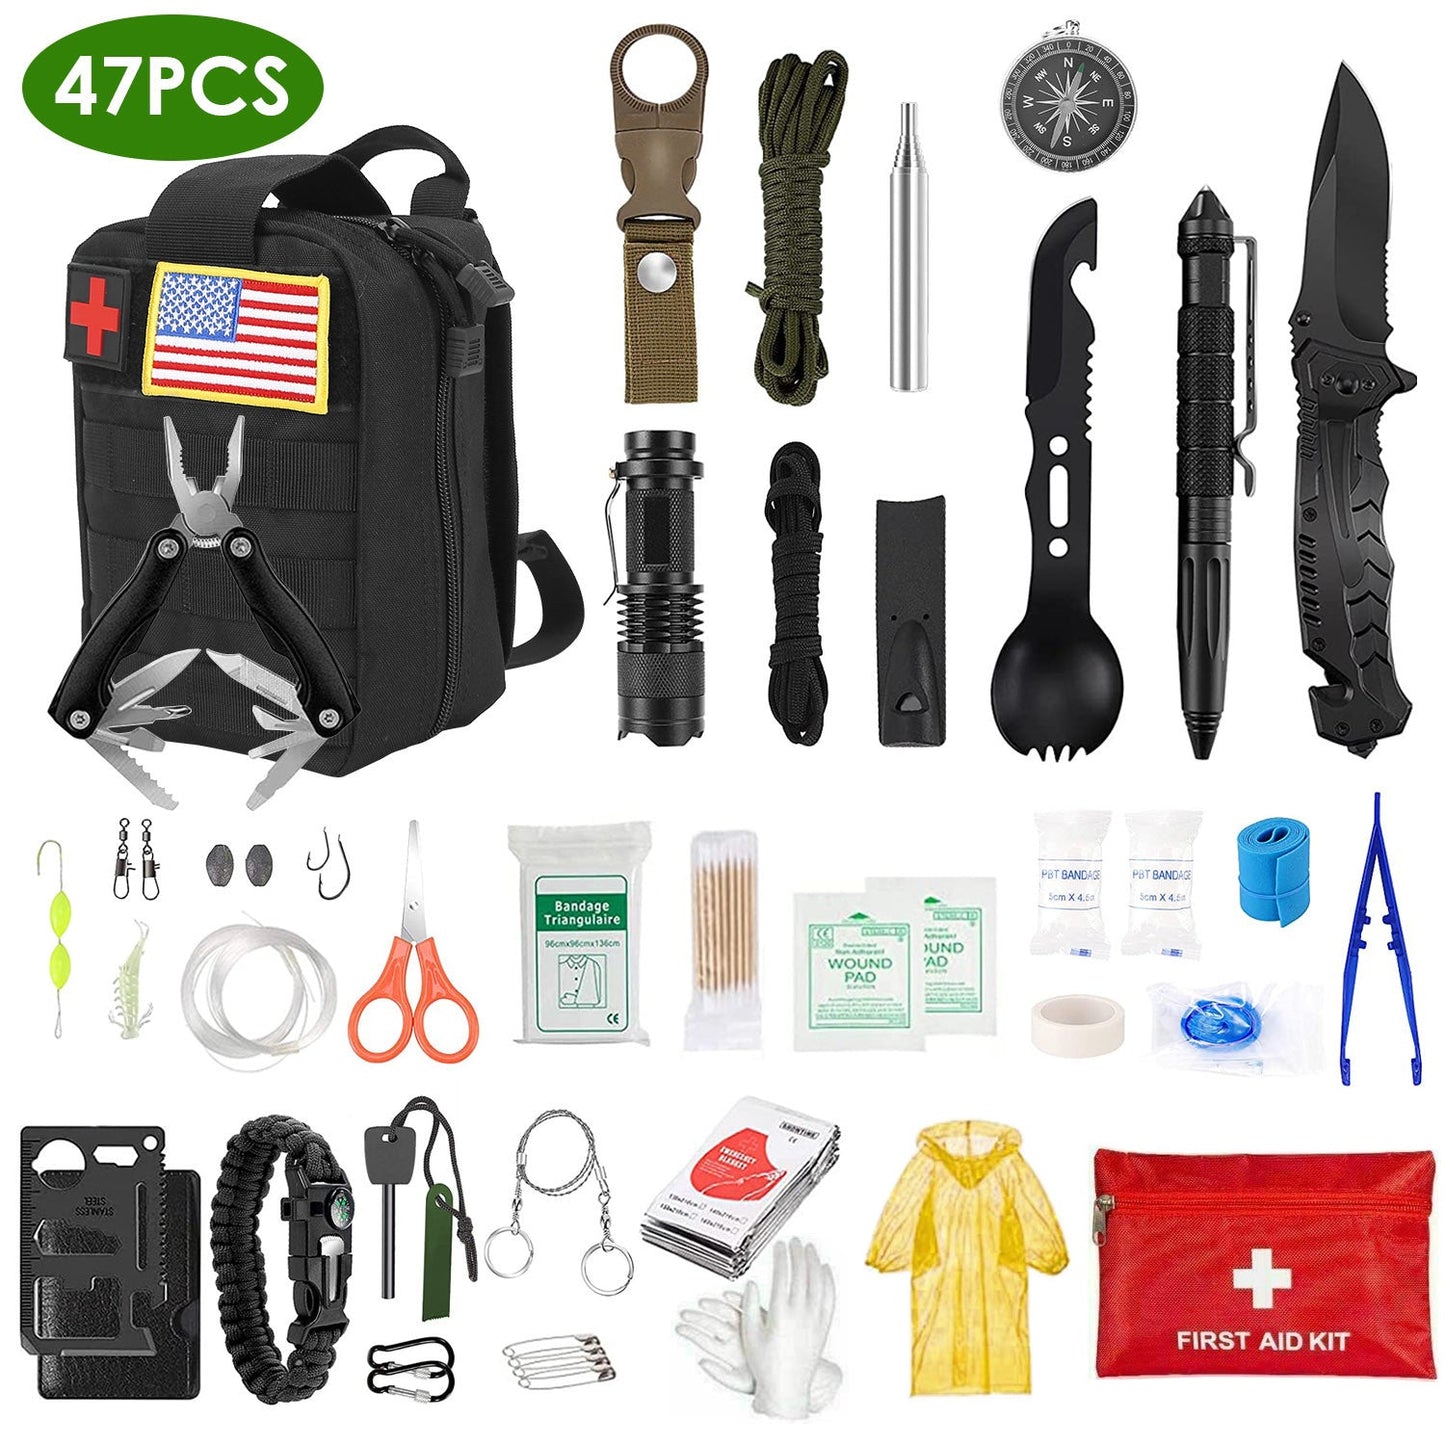 LakeForest 47Pcs Ultimate Emergency Survival Kit: Be Prepared for Any Adventure